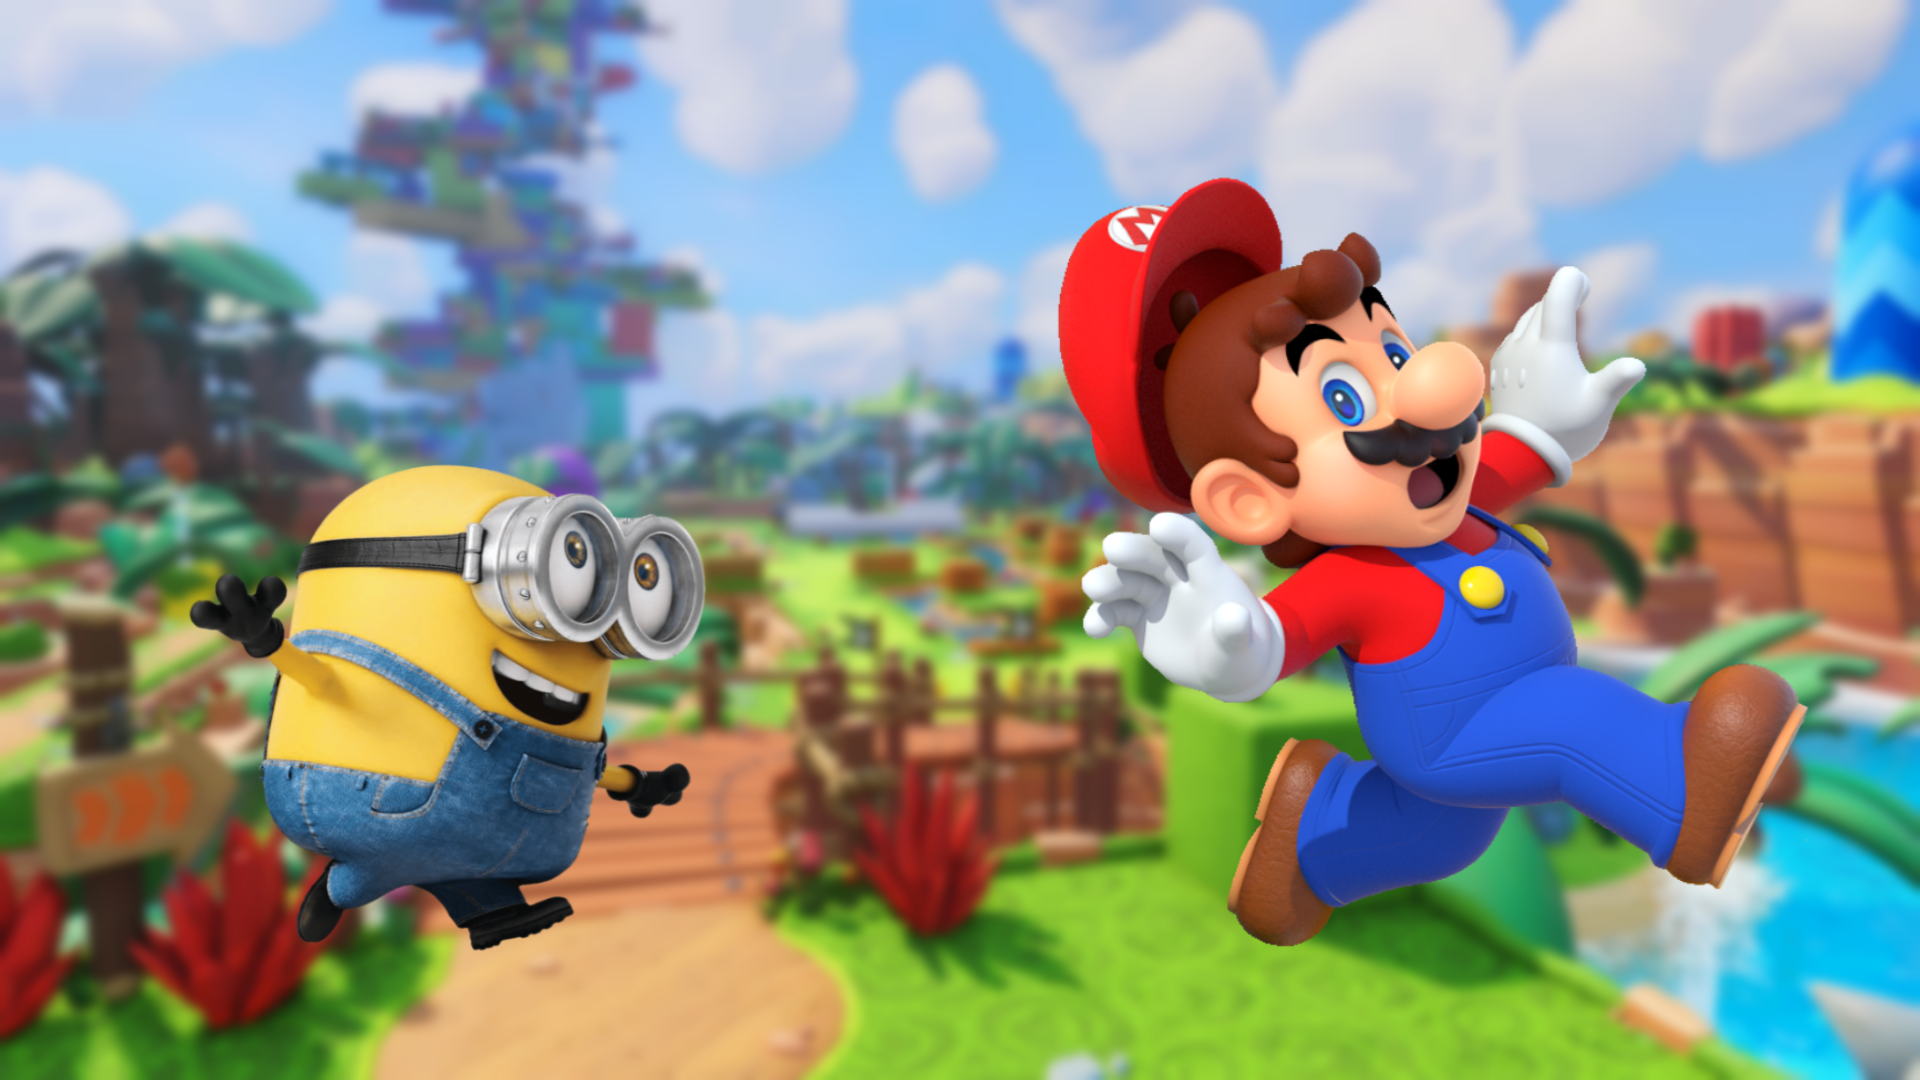 Mario Movie from the Studio Behind ‘Minions’ Could Release by 2020